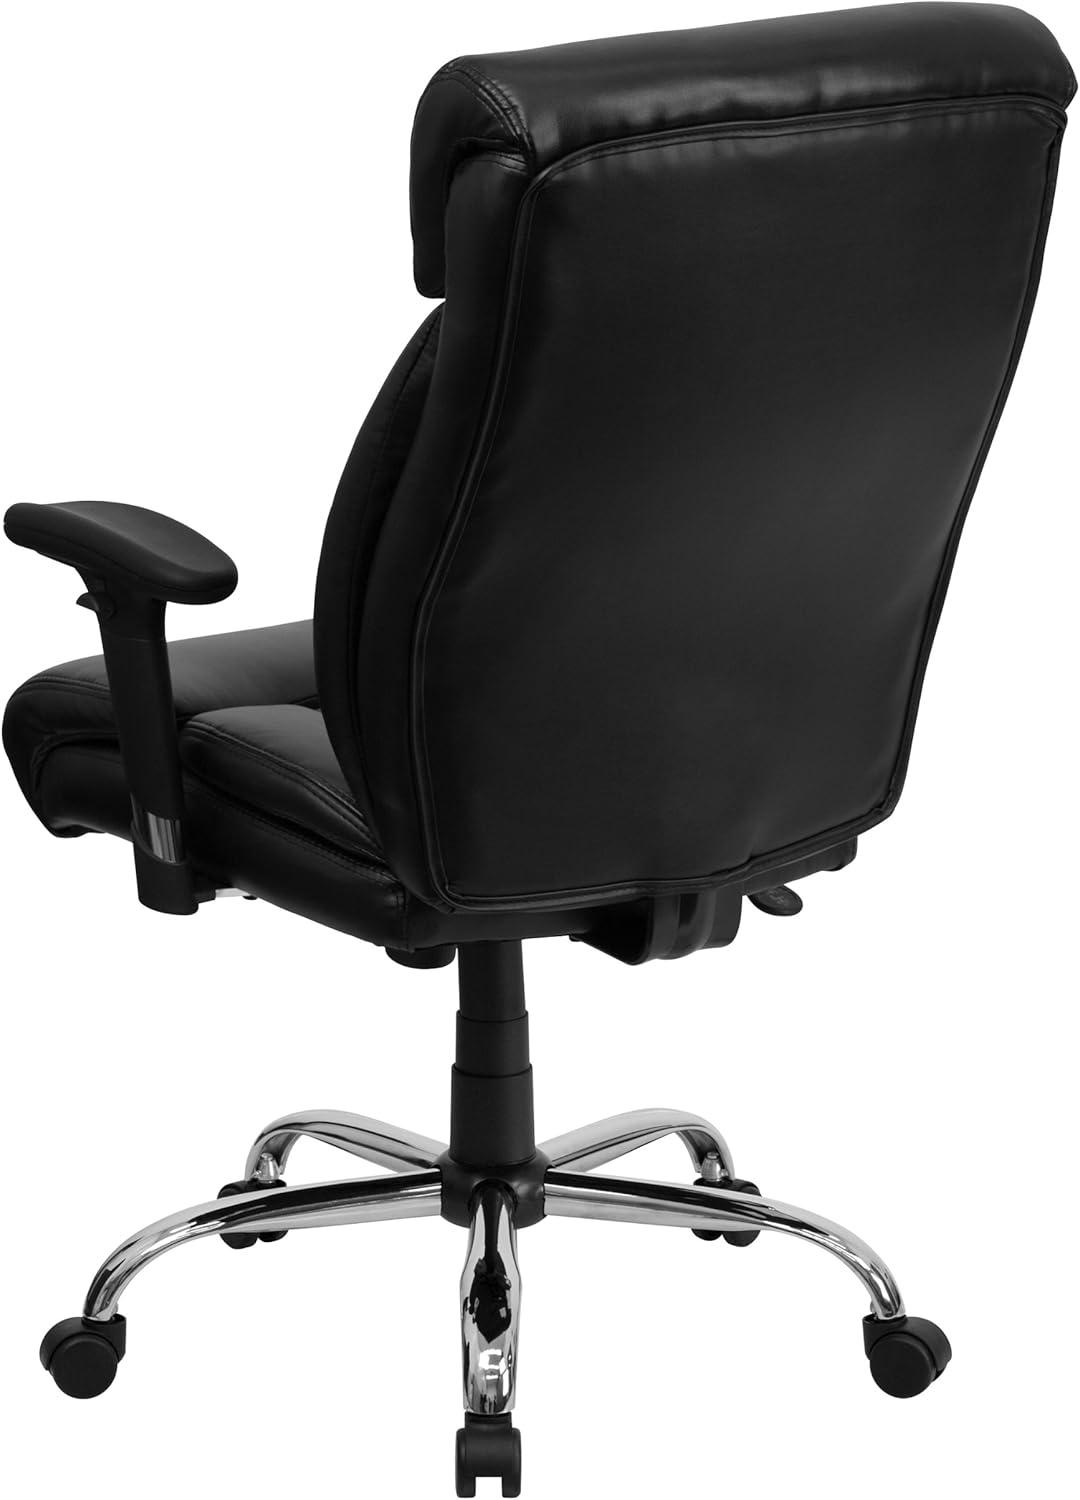 Executive High-Back Ergonomic Leather Swivel Chair with Adjustable Arms - Black